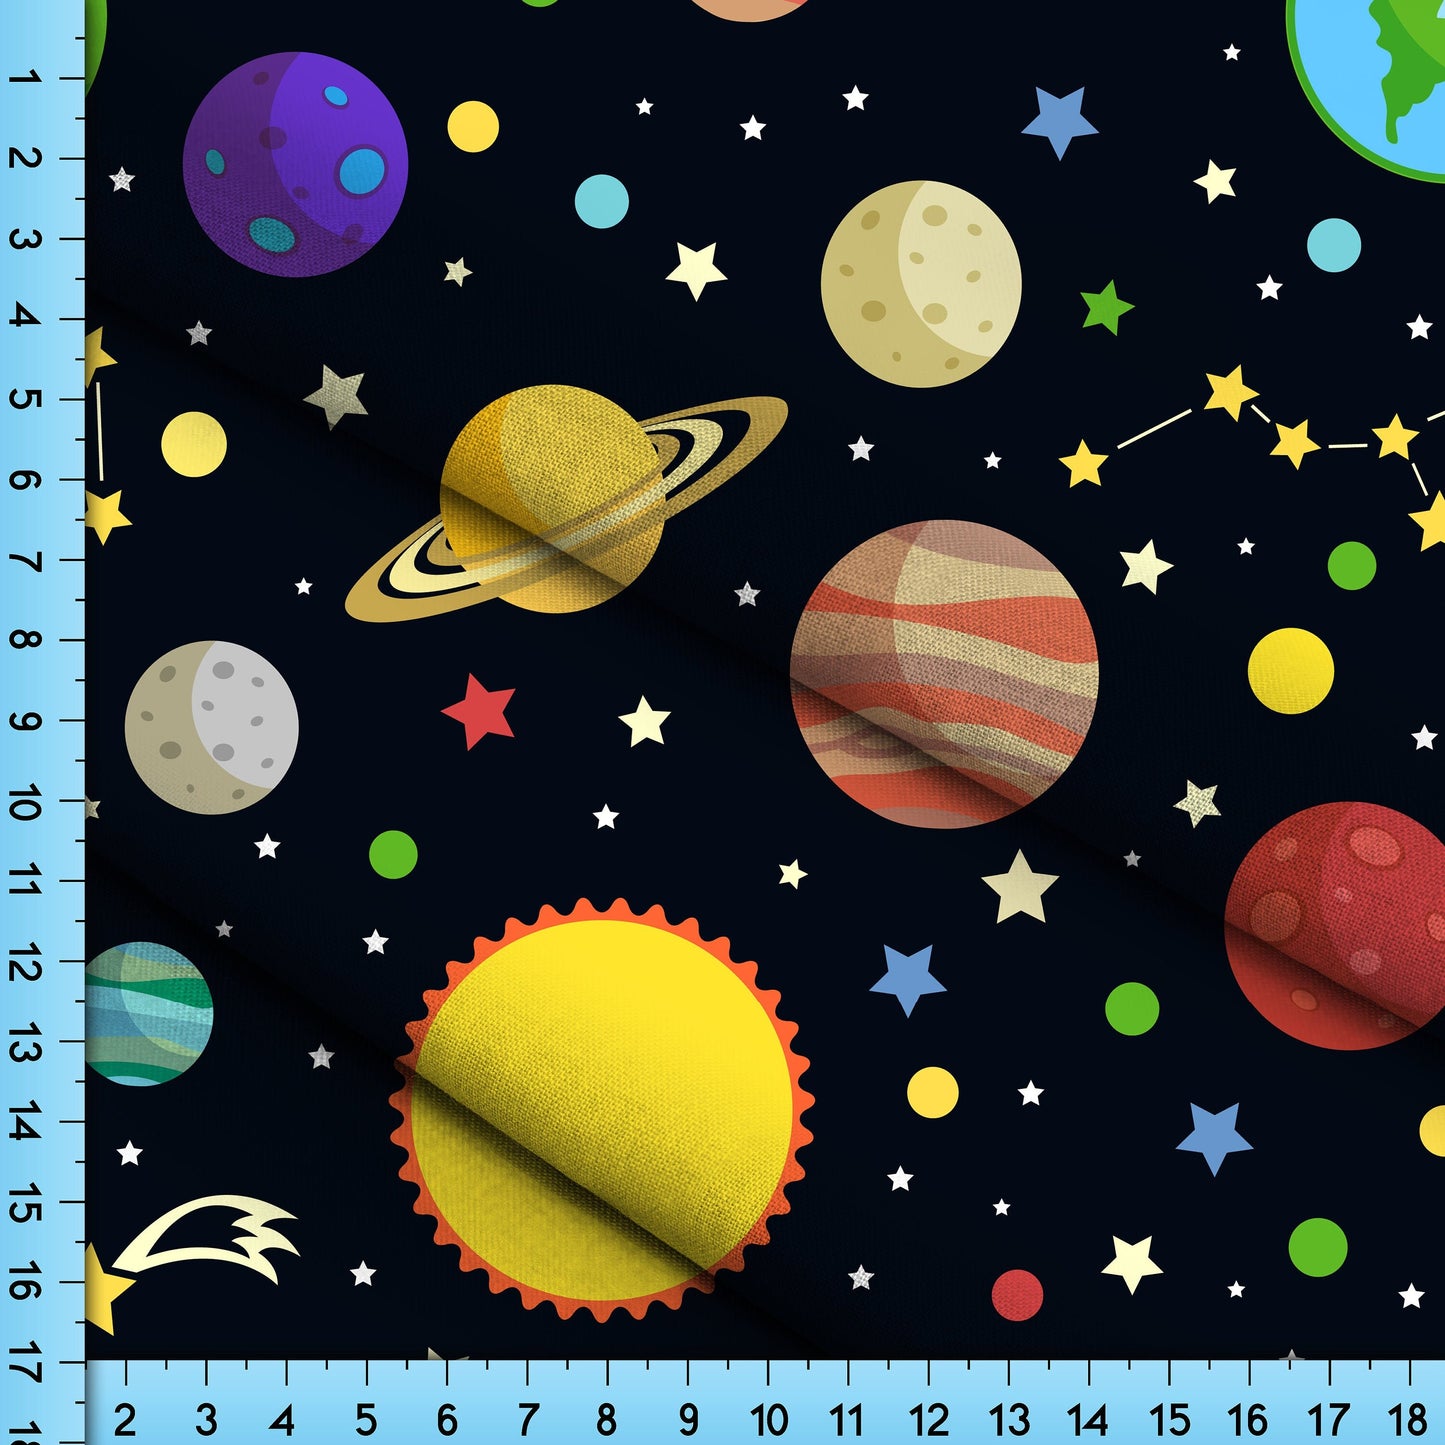 Solar System Stars Fabric By The Yard, Planets and Space Pattern, Custom Printed on the fabric of your choice